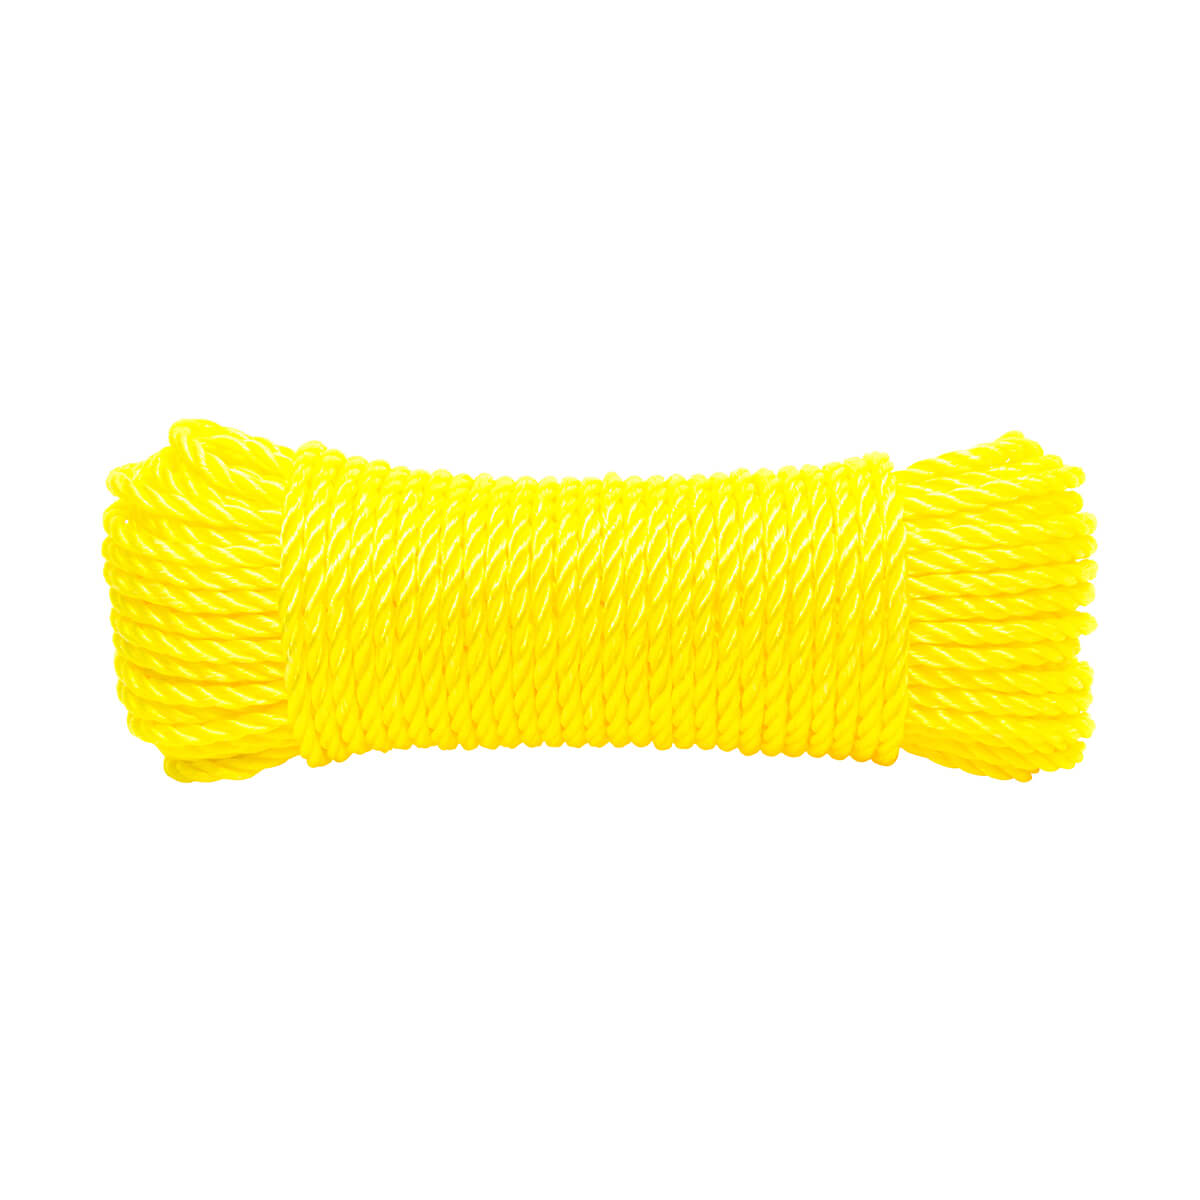 Twisted Polypropylene Rope Hank - Yellow - 1/4-in x 100-ft